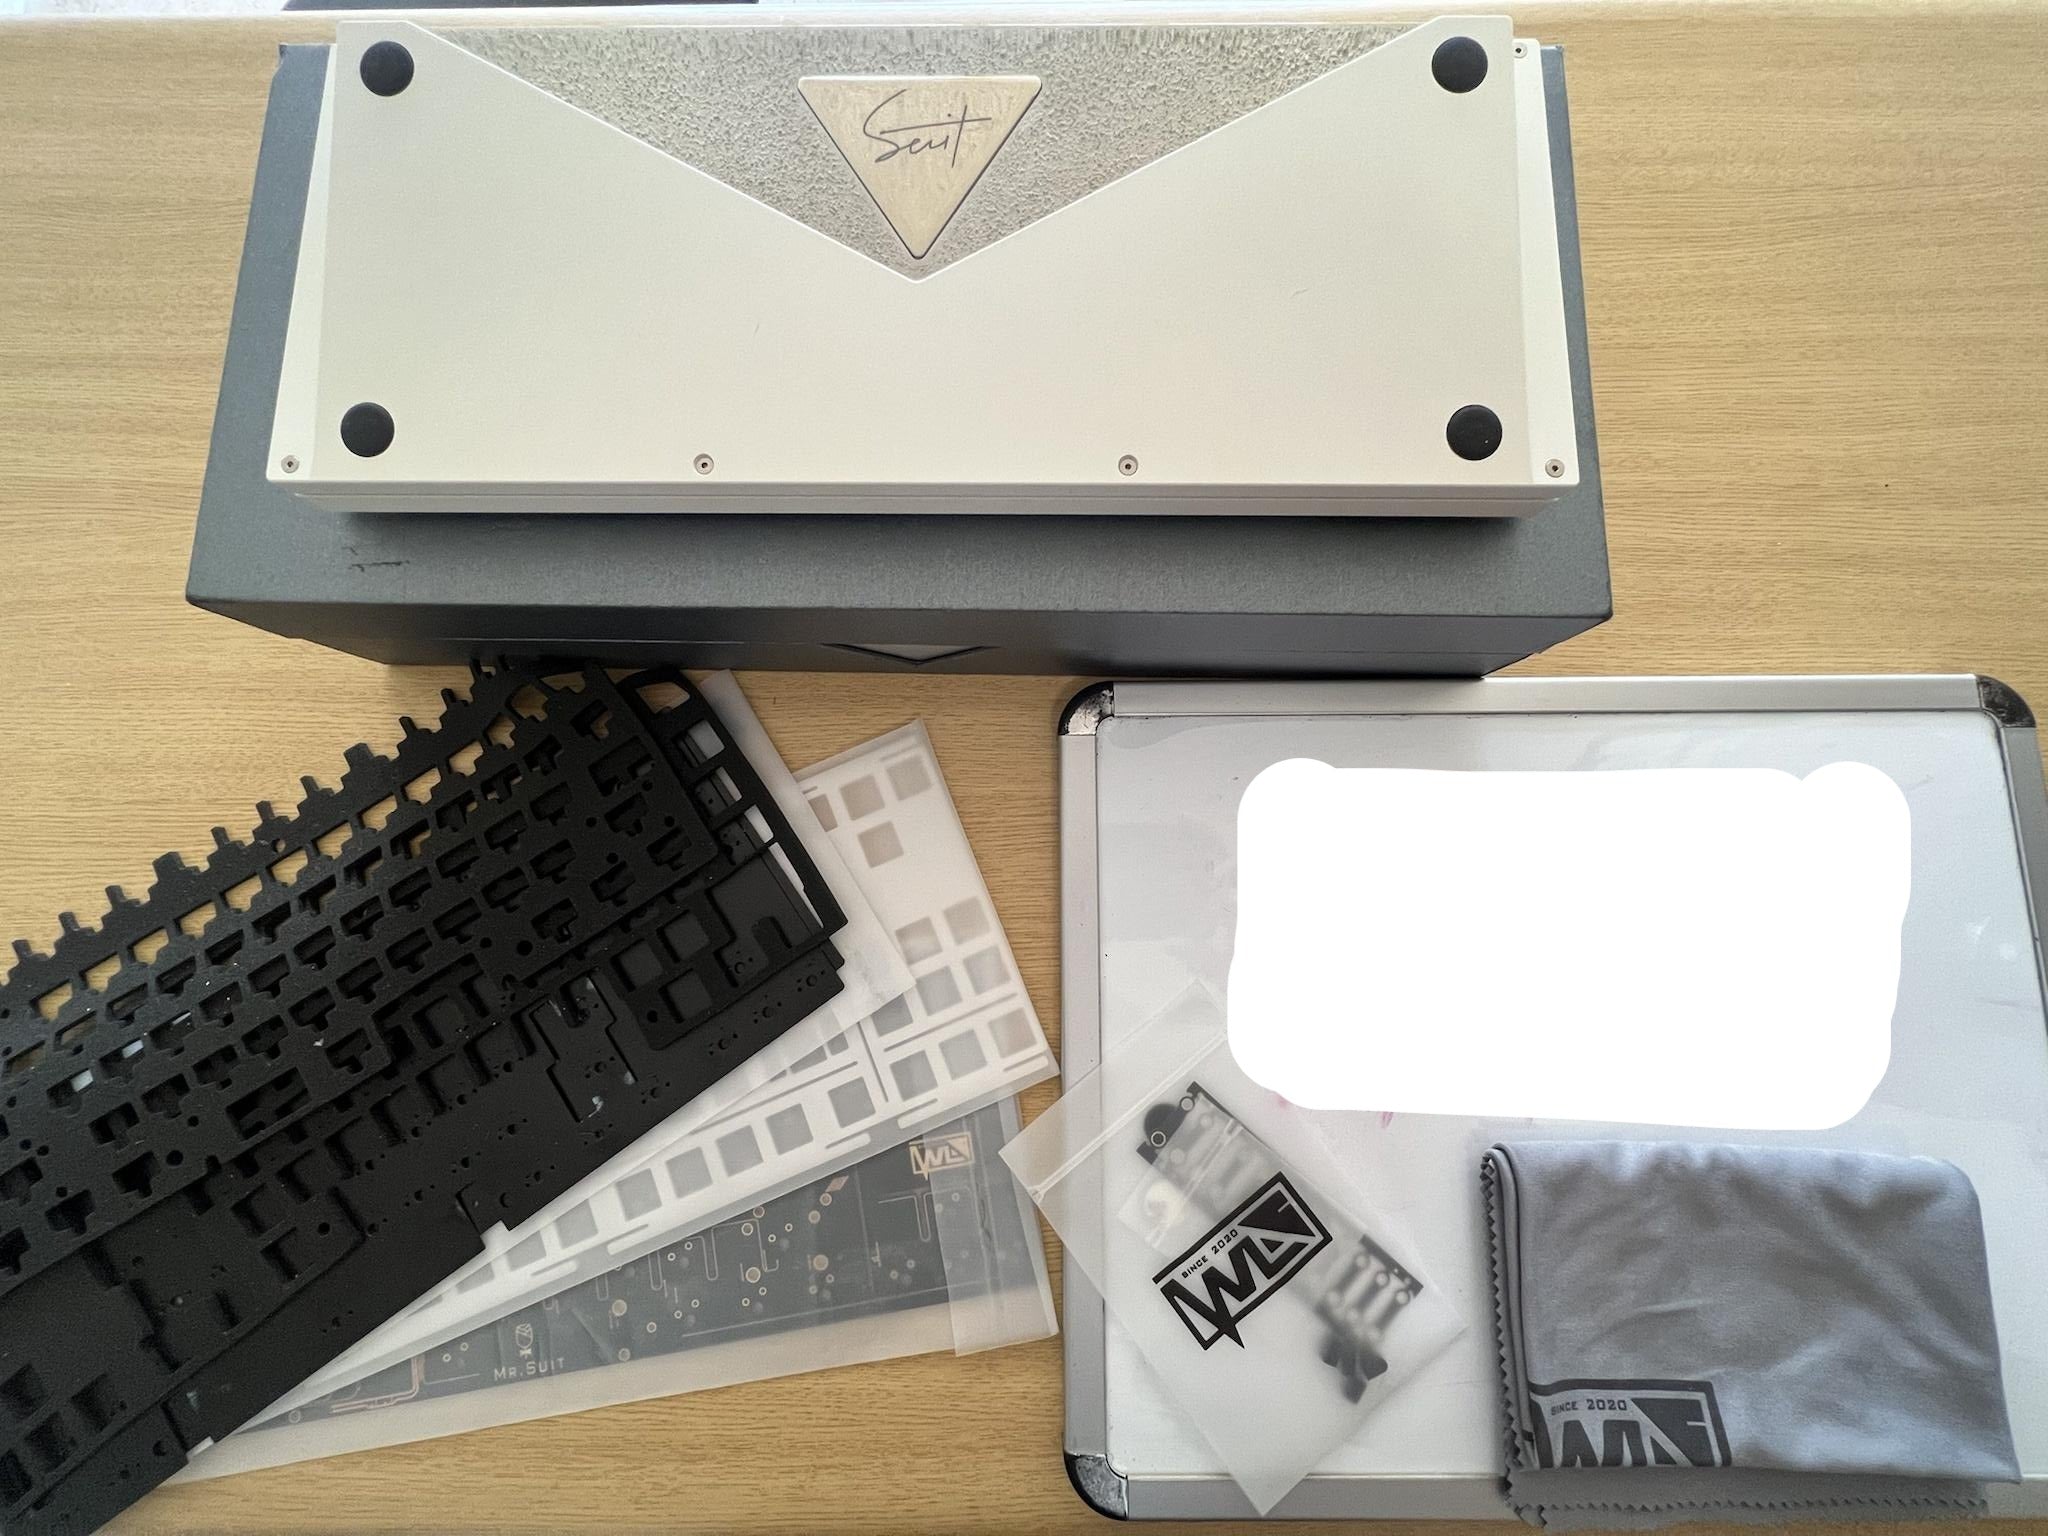 [KFA MARKETPLACE] Mr suit WKL Babypowder Silver Glossy Chamfers Built - KeebsForAll